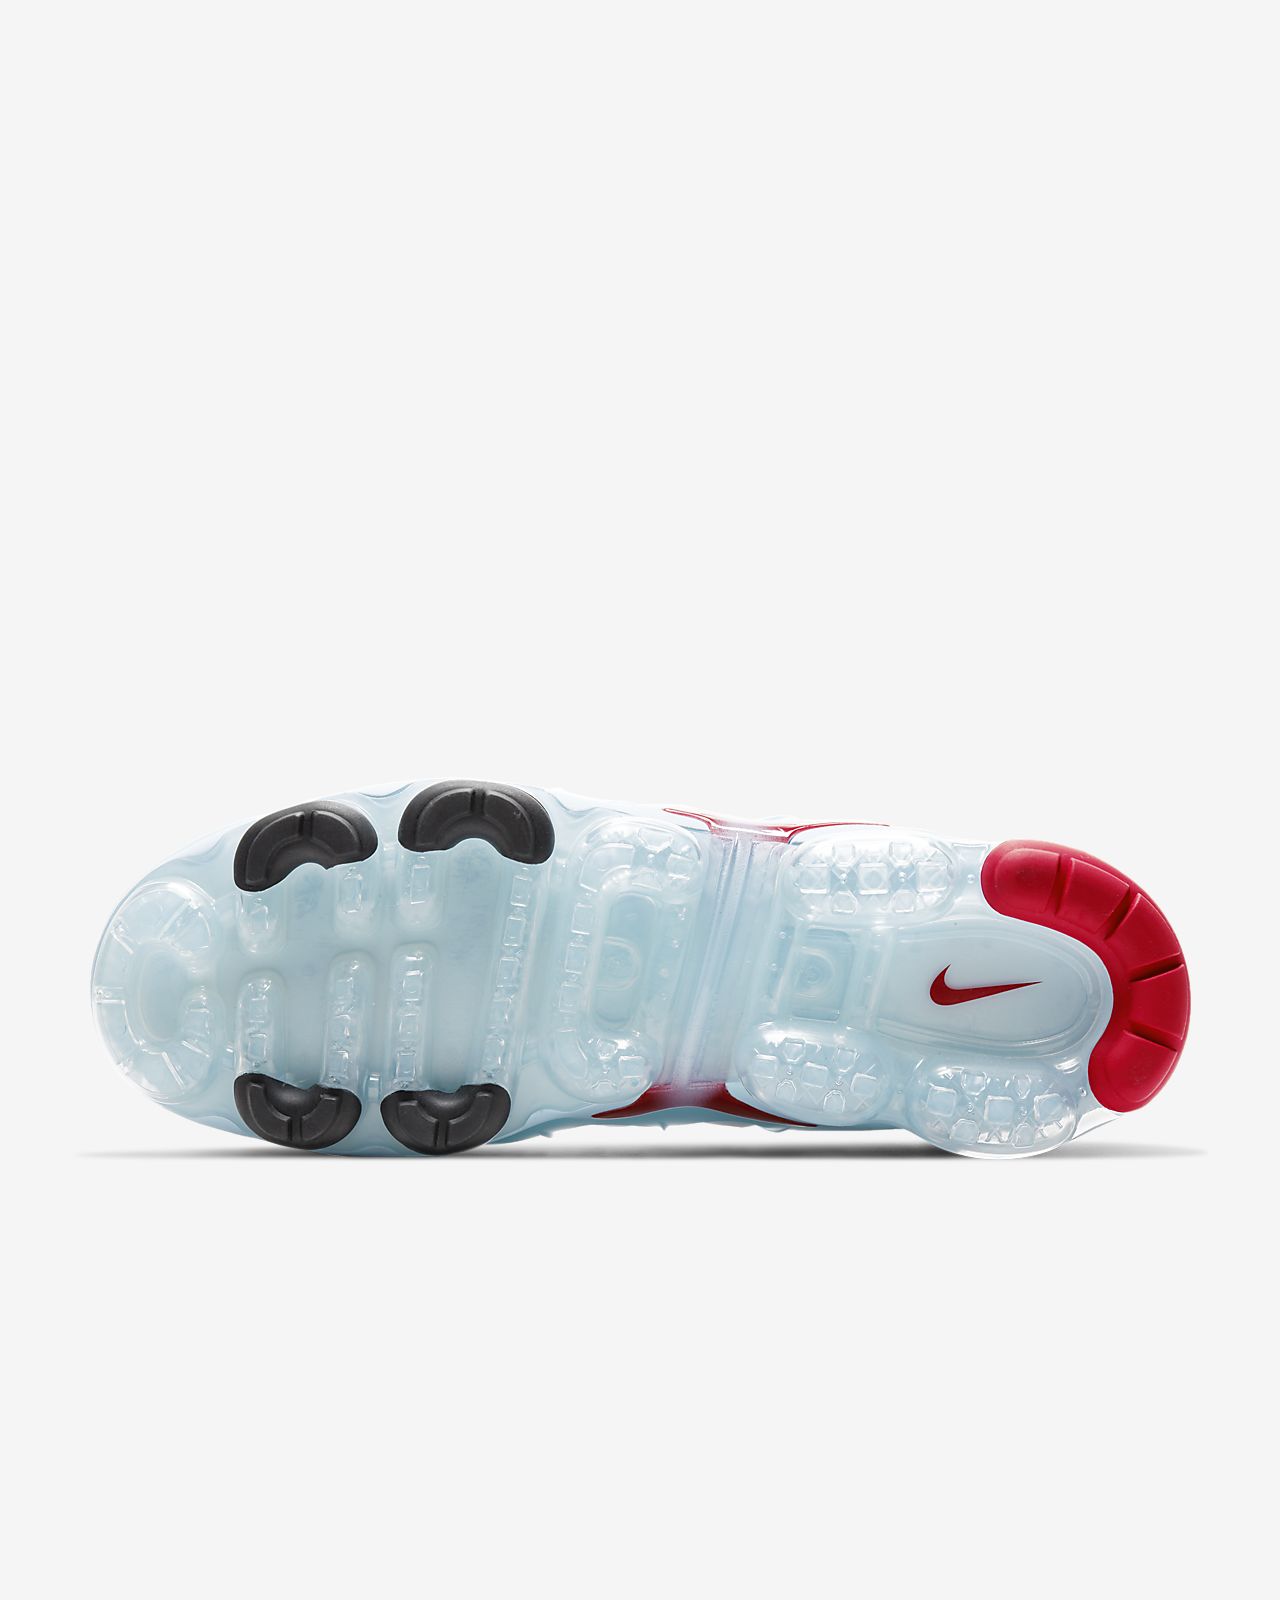 Nike Air VaporMax Plus Wolf Gray Style Code 924453 007